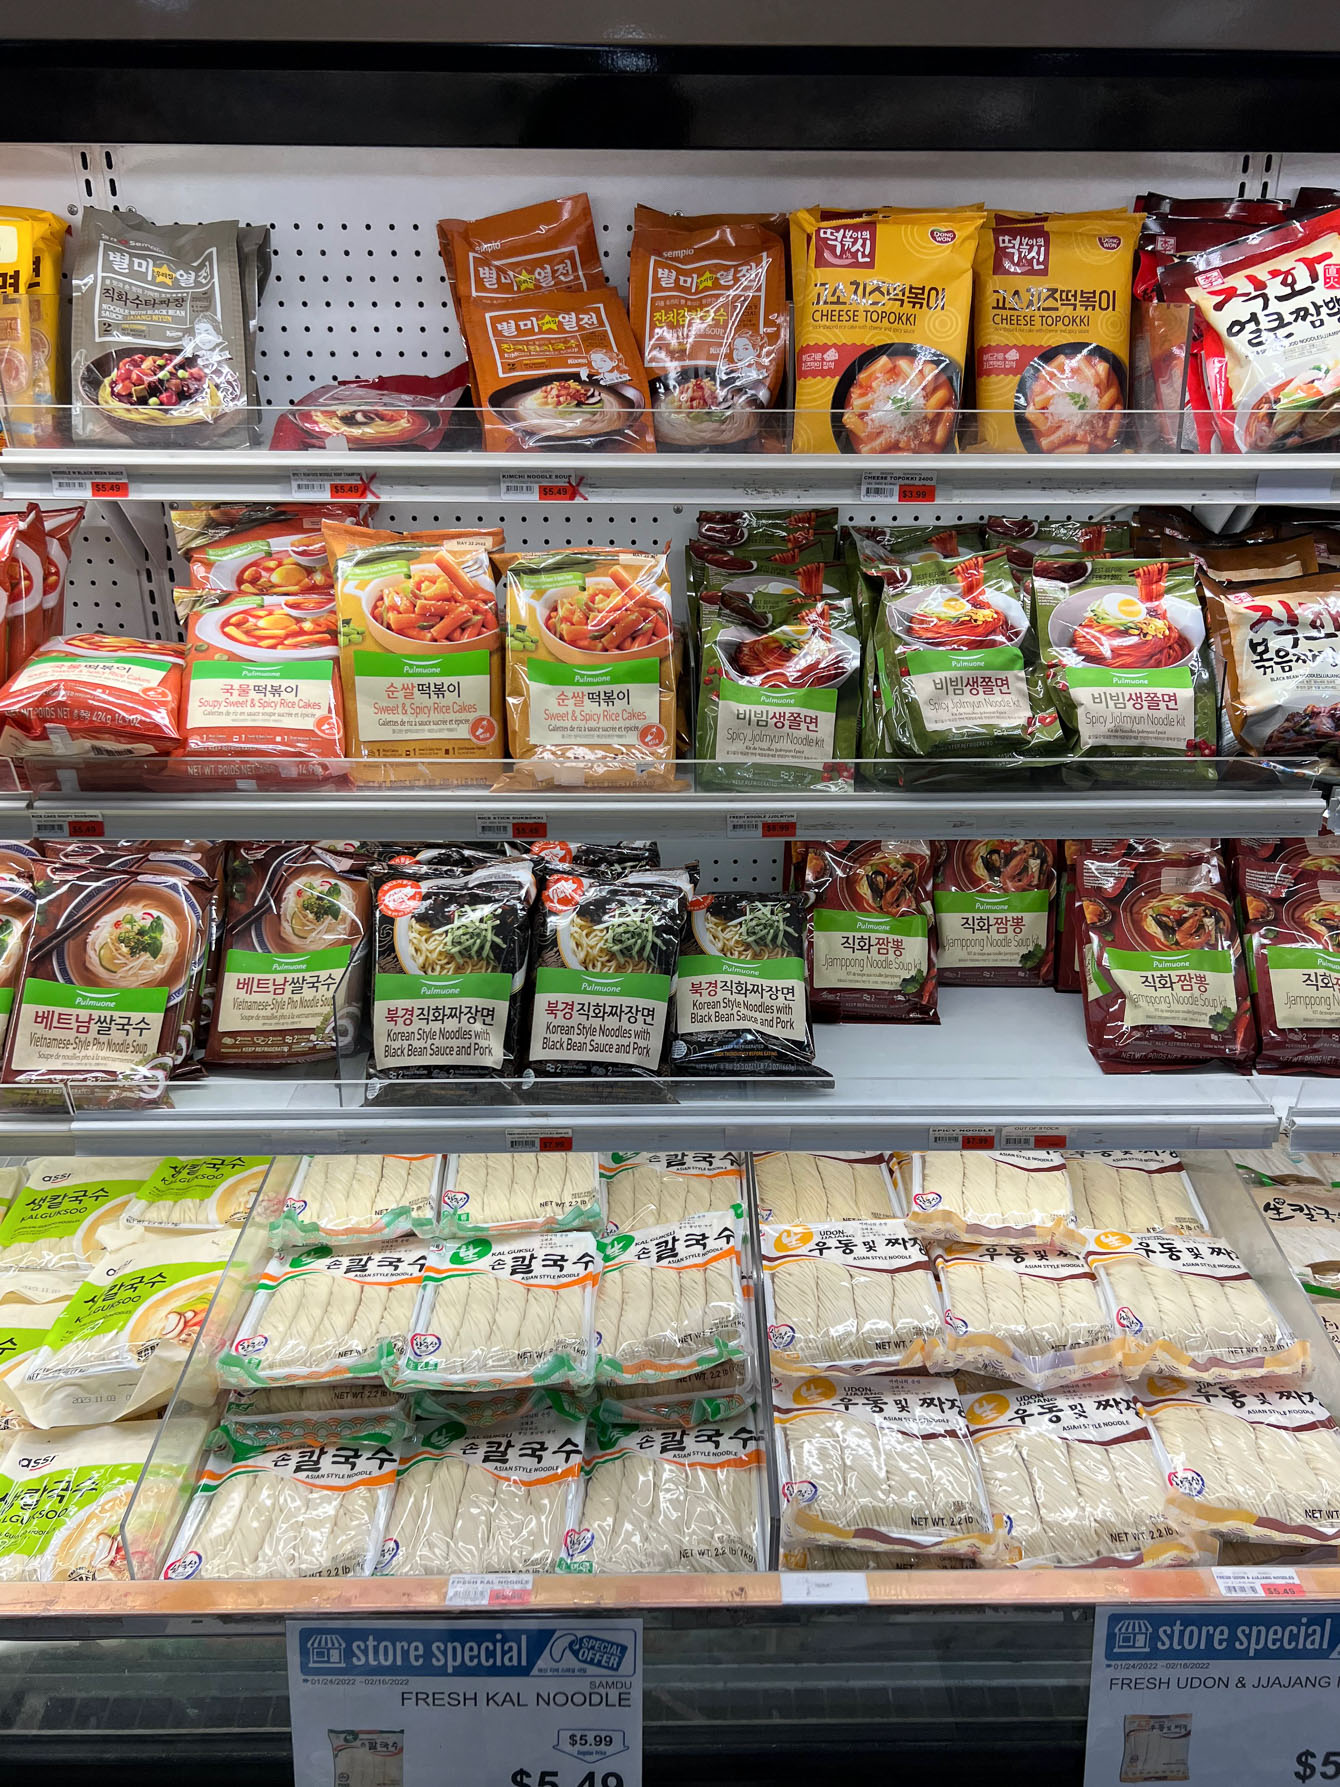 Various Korean wheat noodles are displayed in the refrigerator section of Korean grocery store.